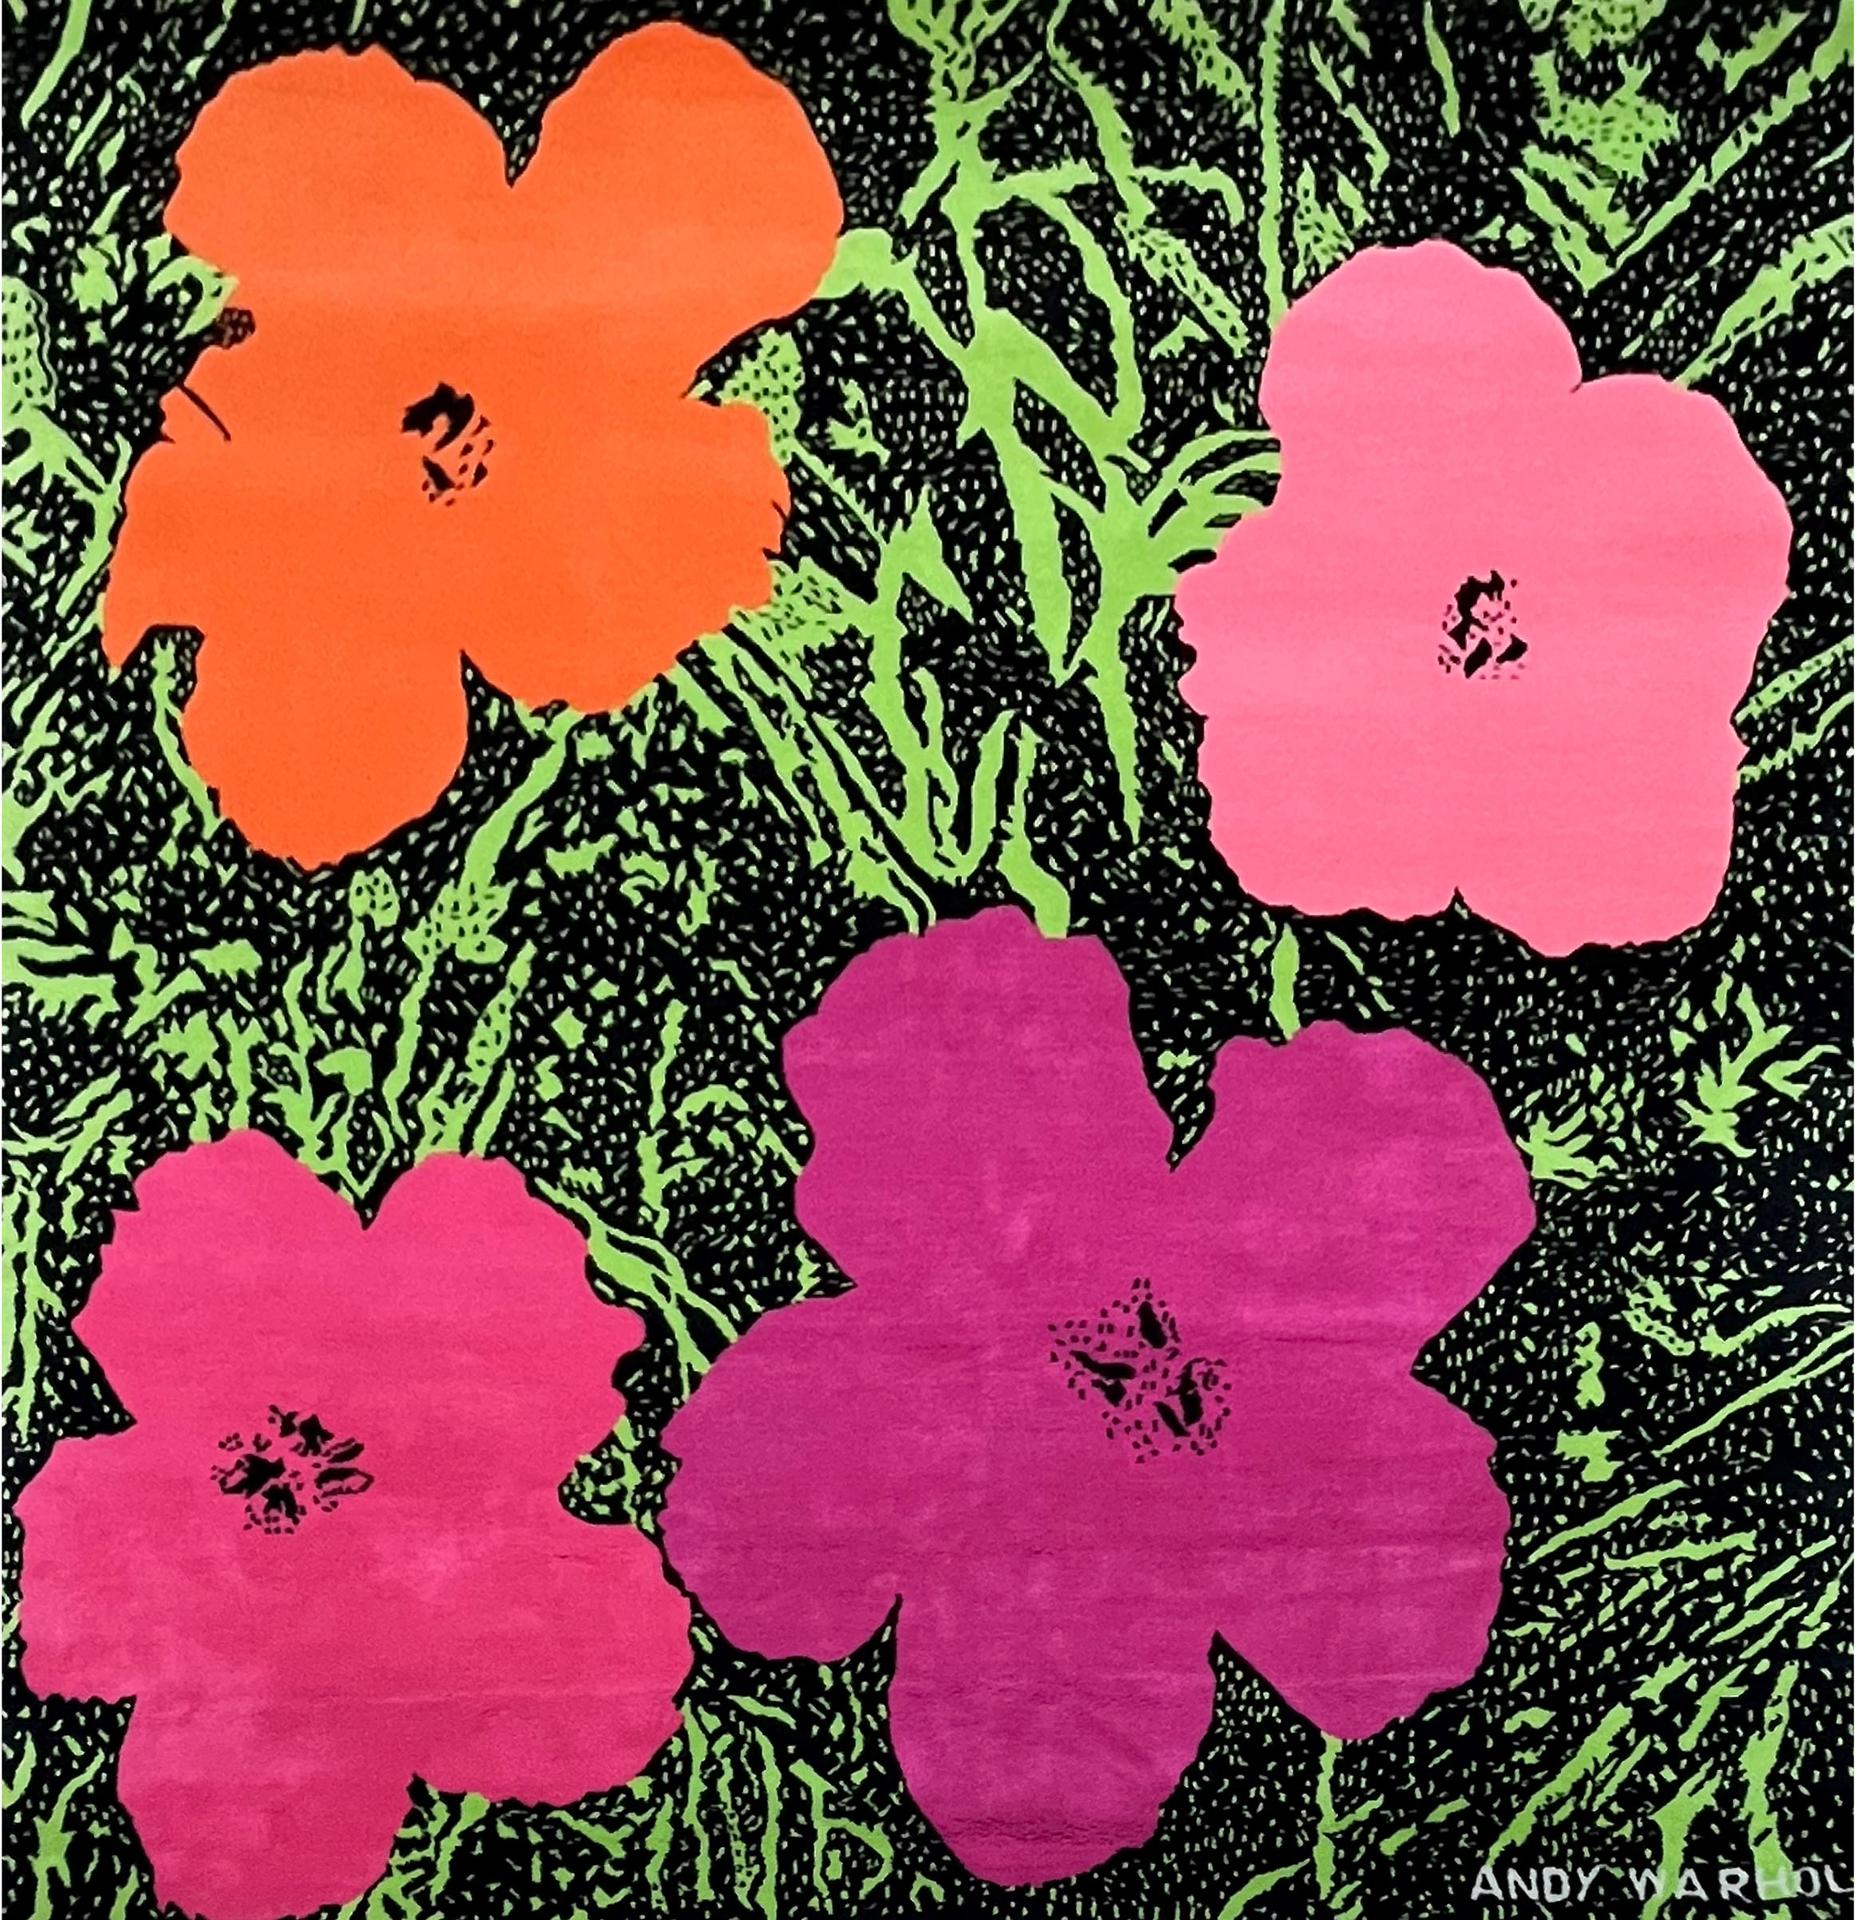 Andy Warhol (1928-1987) - Flowers Tapestry, Circa 1980